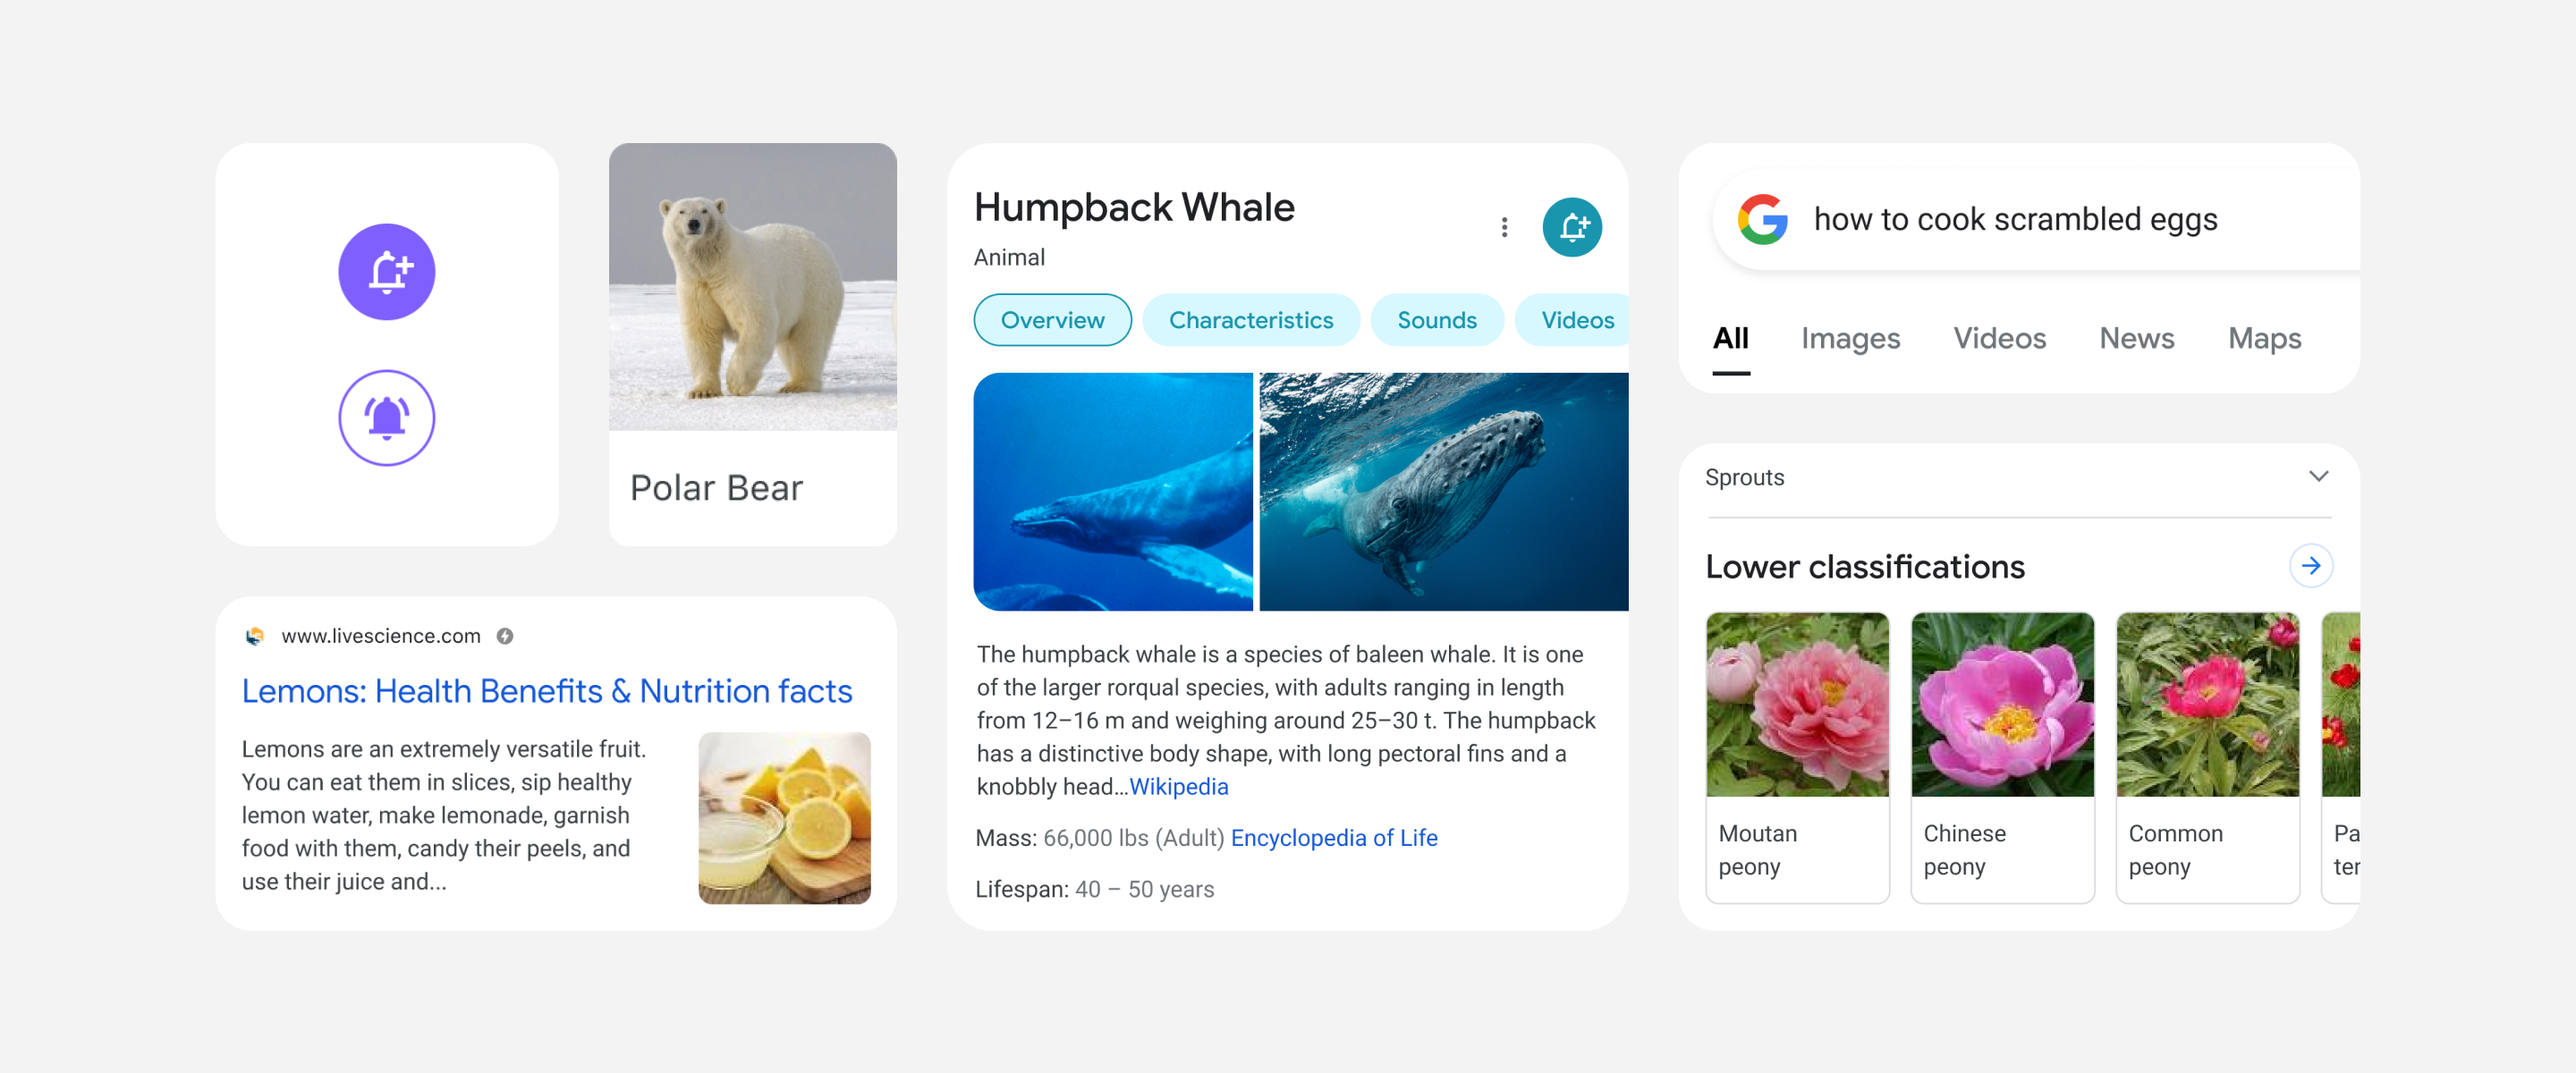 Google refreshes its mobile search experience